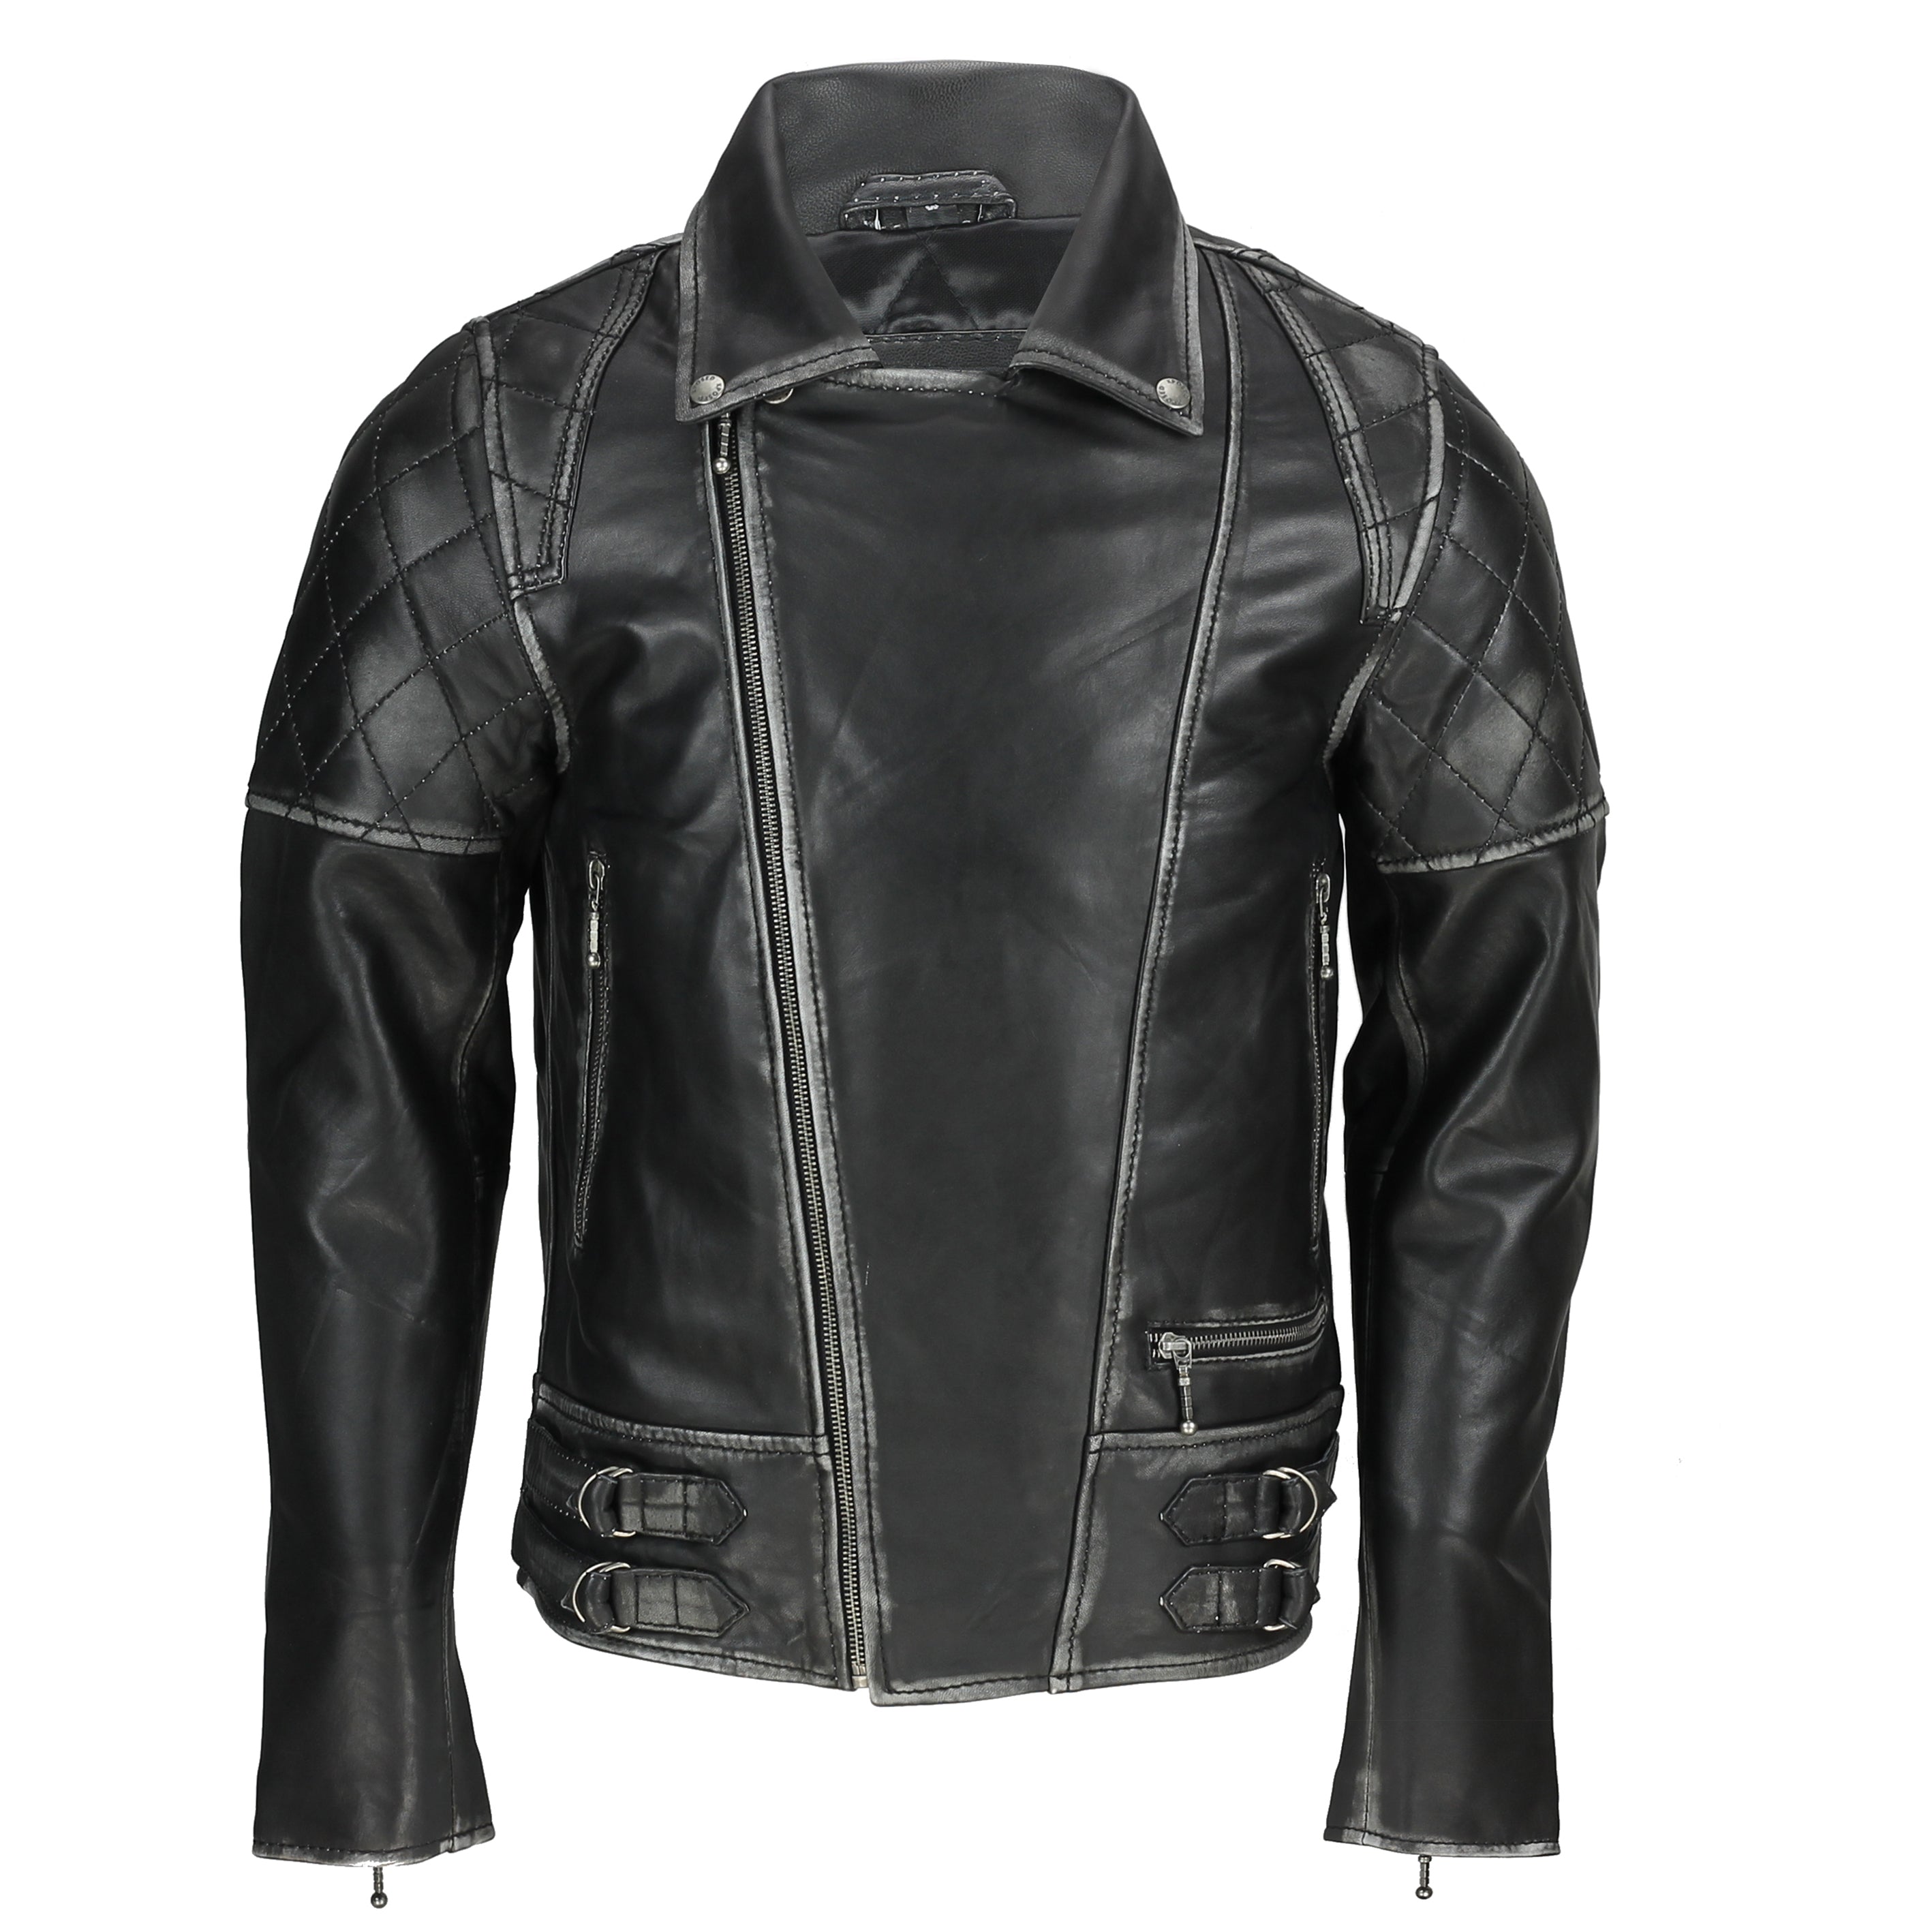 New Mens Vintage Real Leather Biker Jacket in Washed Black Zipped Smart Casual